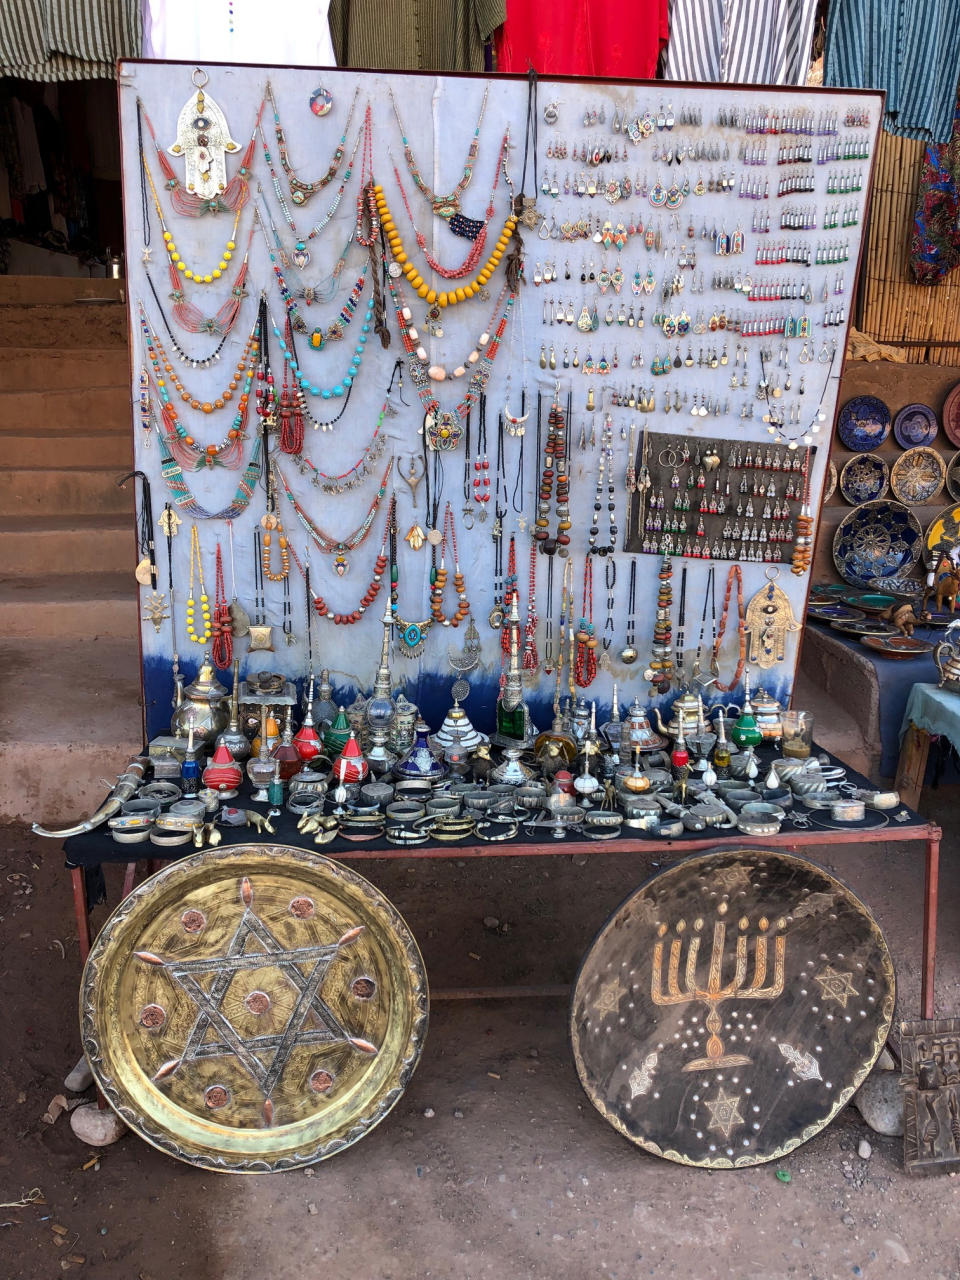 This Jan. 16, 2019, photo shows platters adorned with a menorah and Jewish stars in an outdoor stall near Ksar of Ait-Ben-Haddou in southern Morocco. The North African kingdom once had a thriving Jewish population. Jews of Moroccan descent return often on heritage tours. (Leanne Italie via AP)